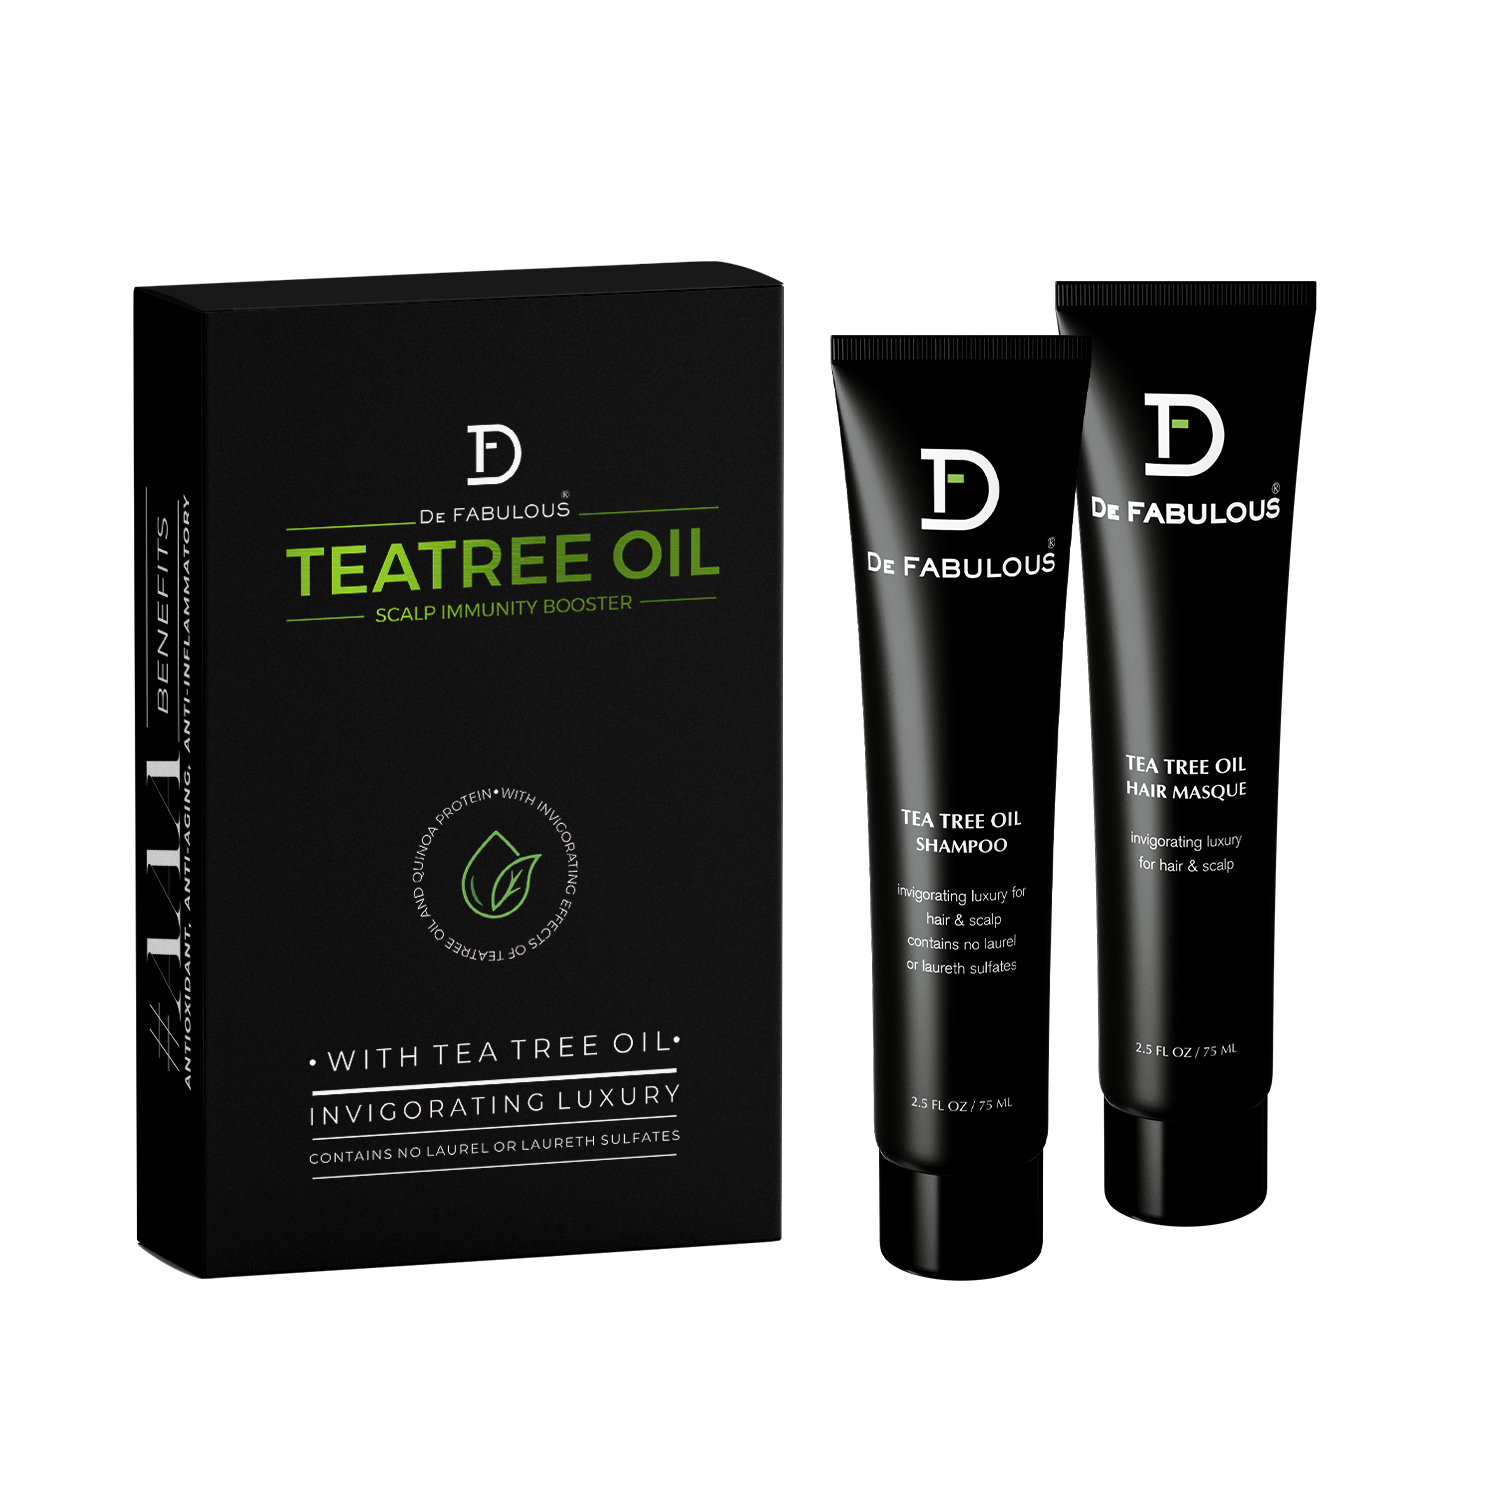 "Tea Tree Oil Shampoo & Masque Combo: Invigorating Cleansing and Rejuvenating Treatment for Healthy, Balanced Hair"